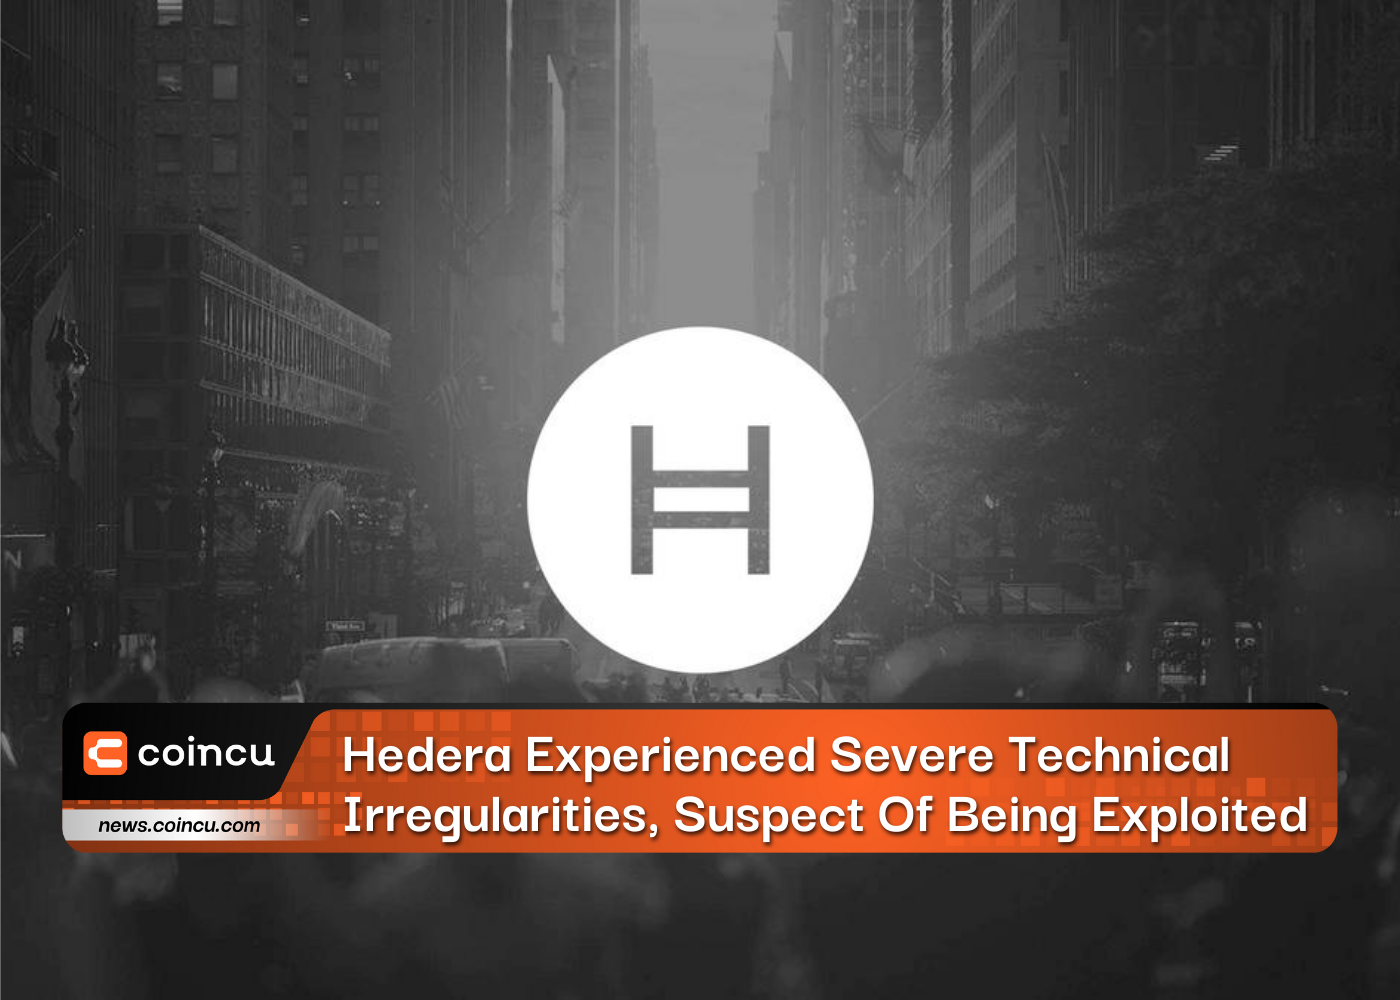 Hedera Experienced Severe Technical Irregularities, Suspect Of Being Exploited